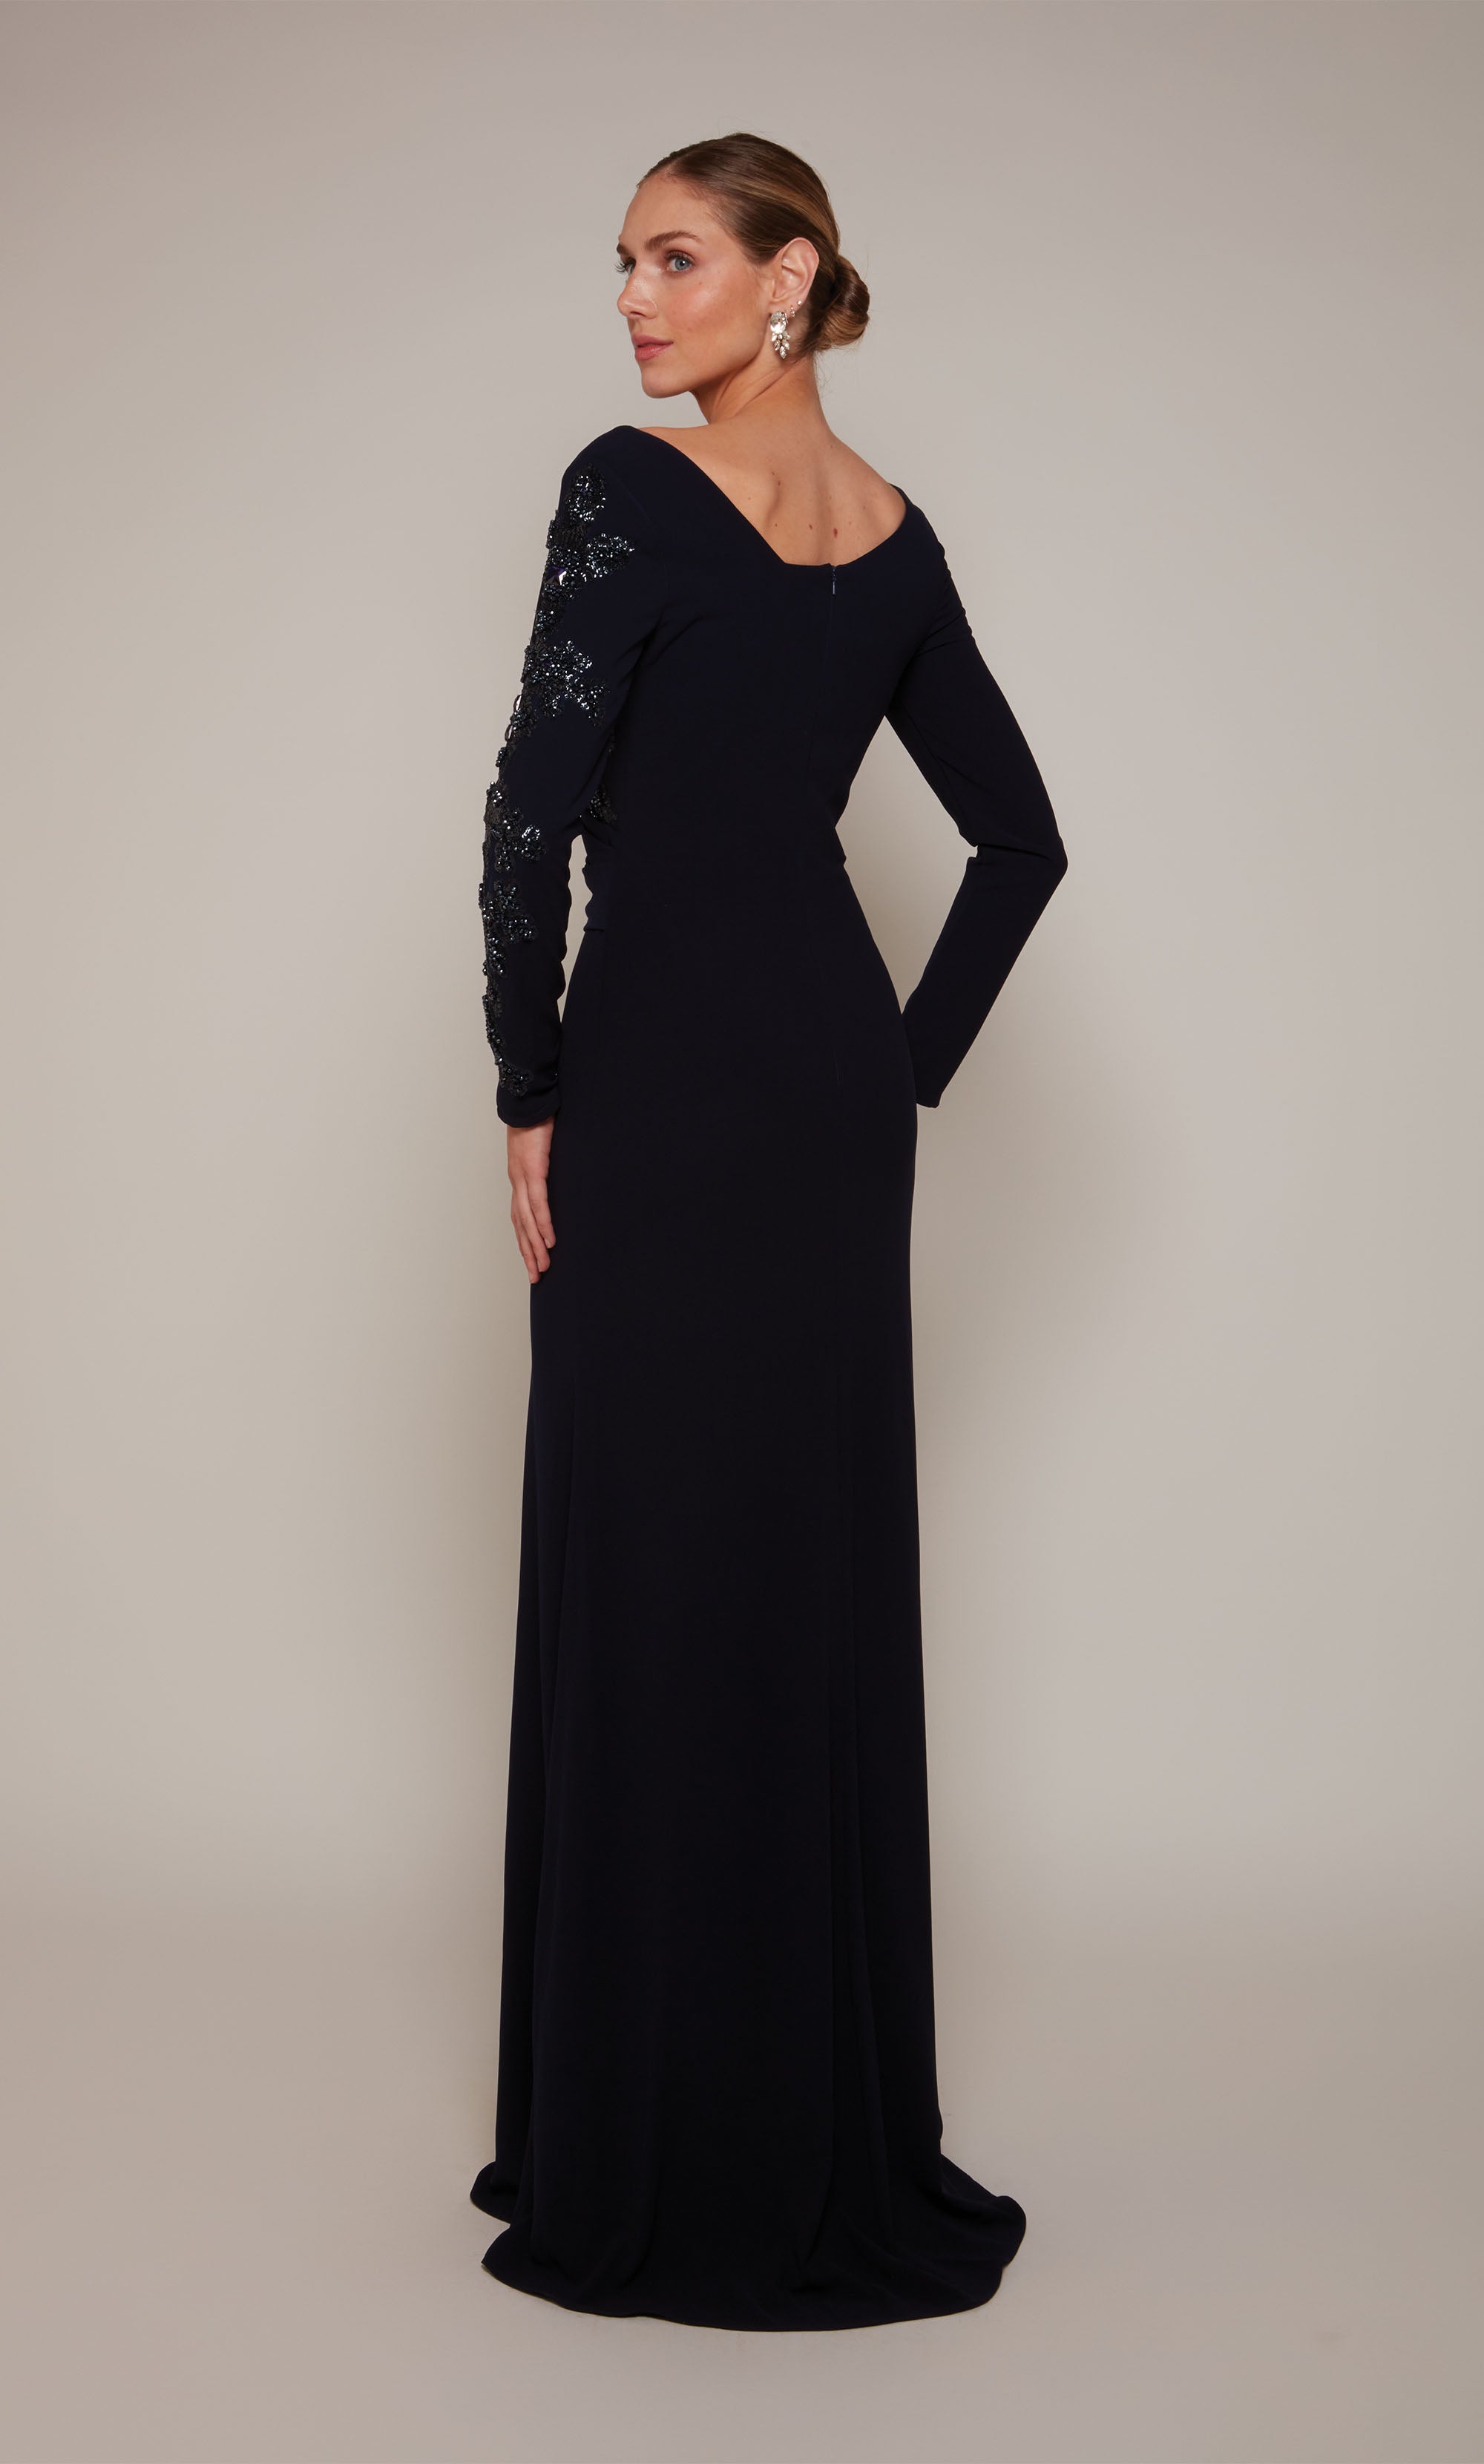 A navy long sleeve mother of the bride dress with an off center V-neckline and silver beaded detail on the left side of the bodice and sleeve.